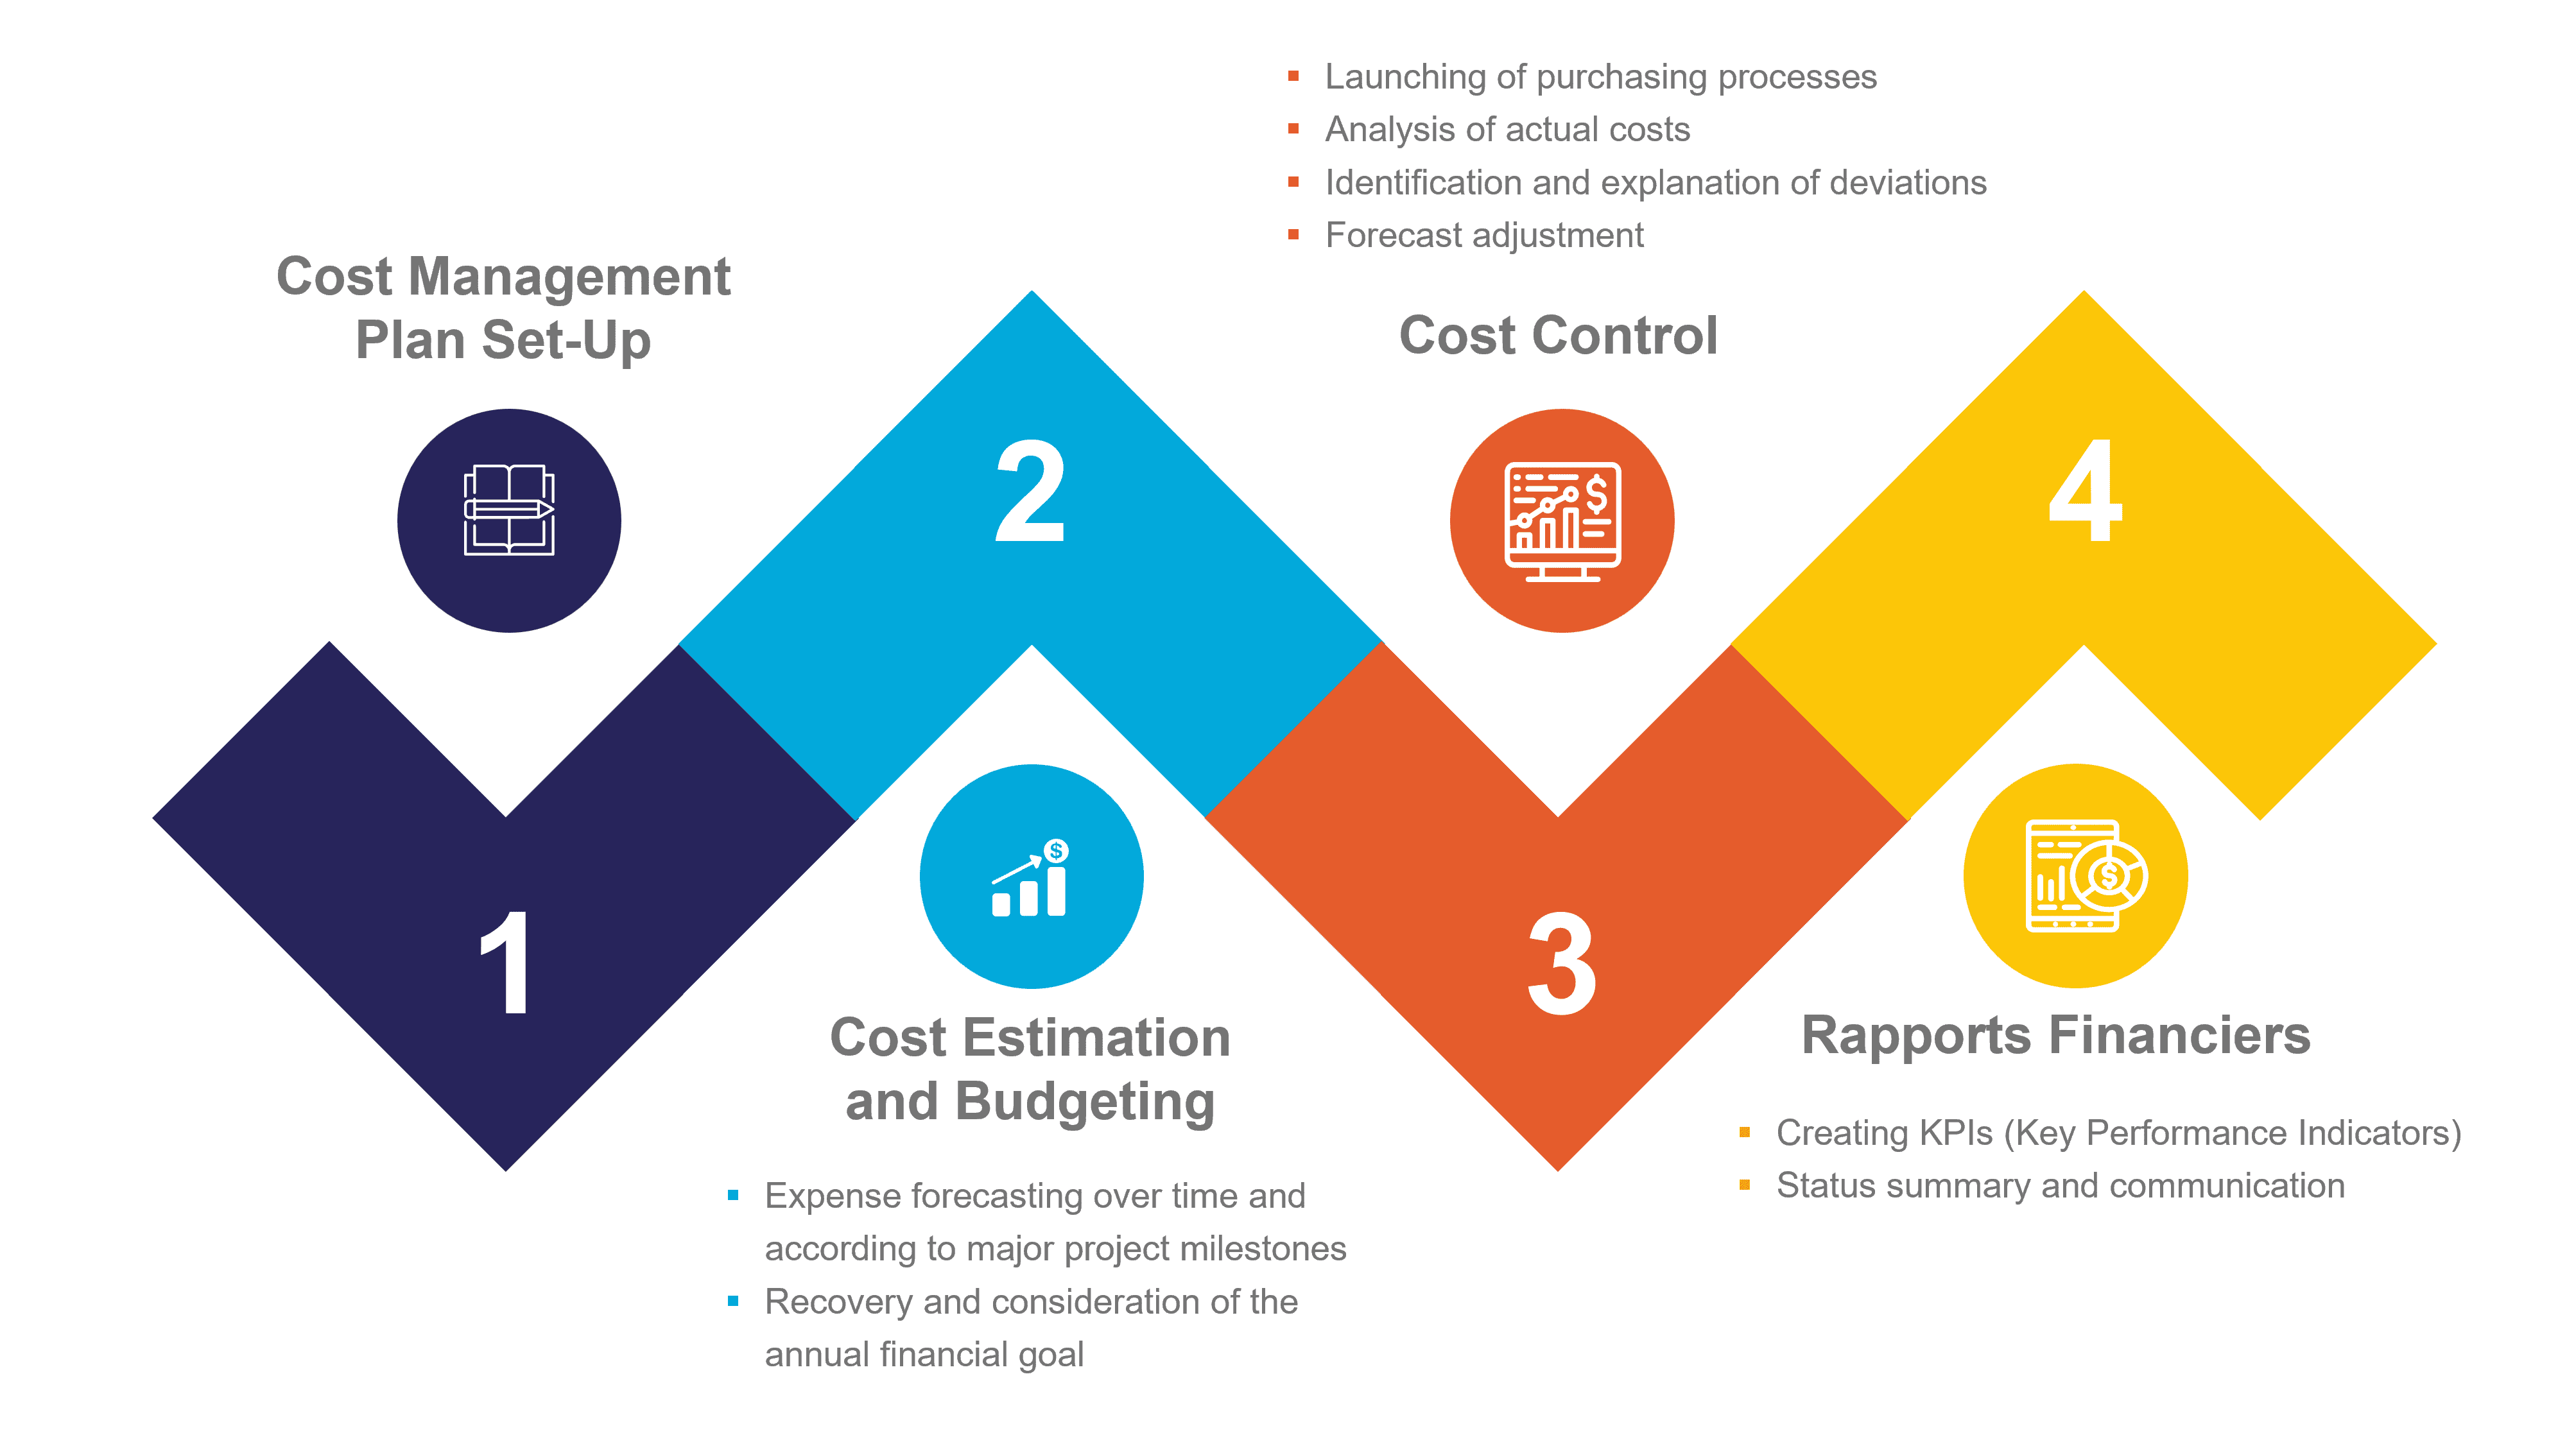 A graphic summarizing the four phases of the cost management process